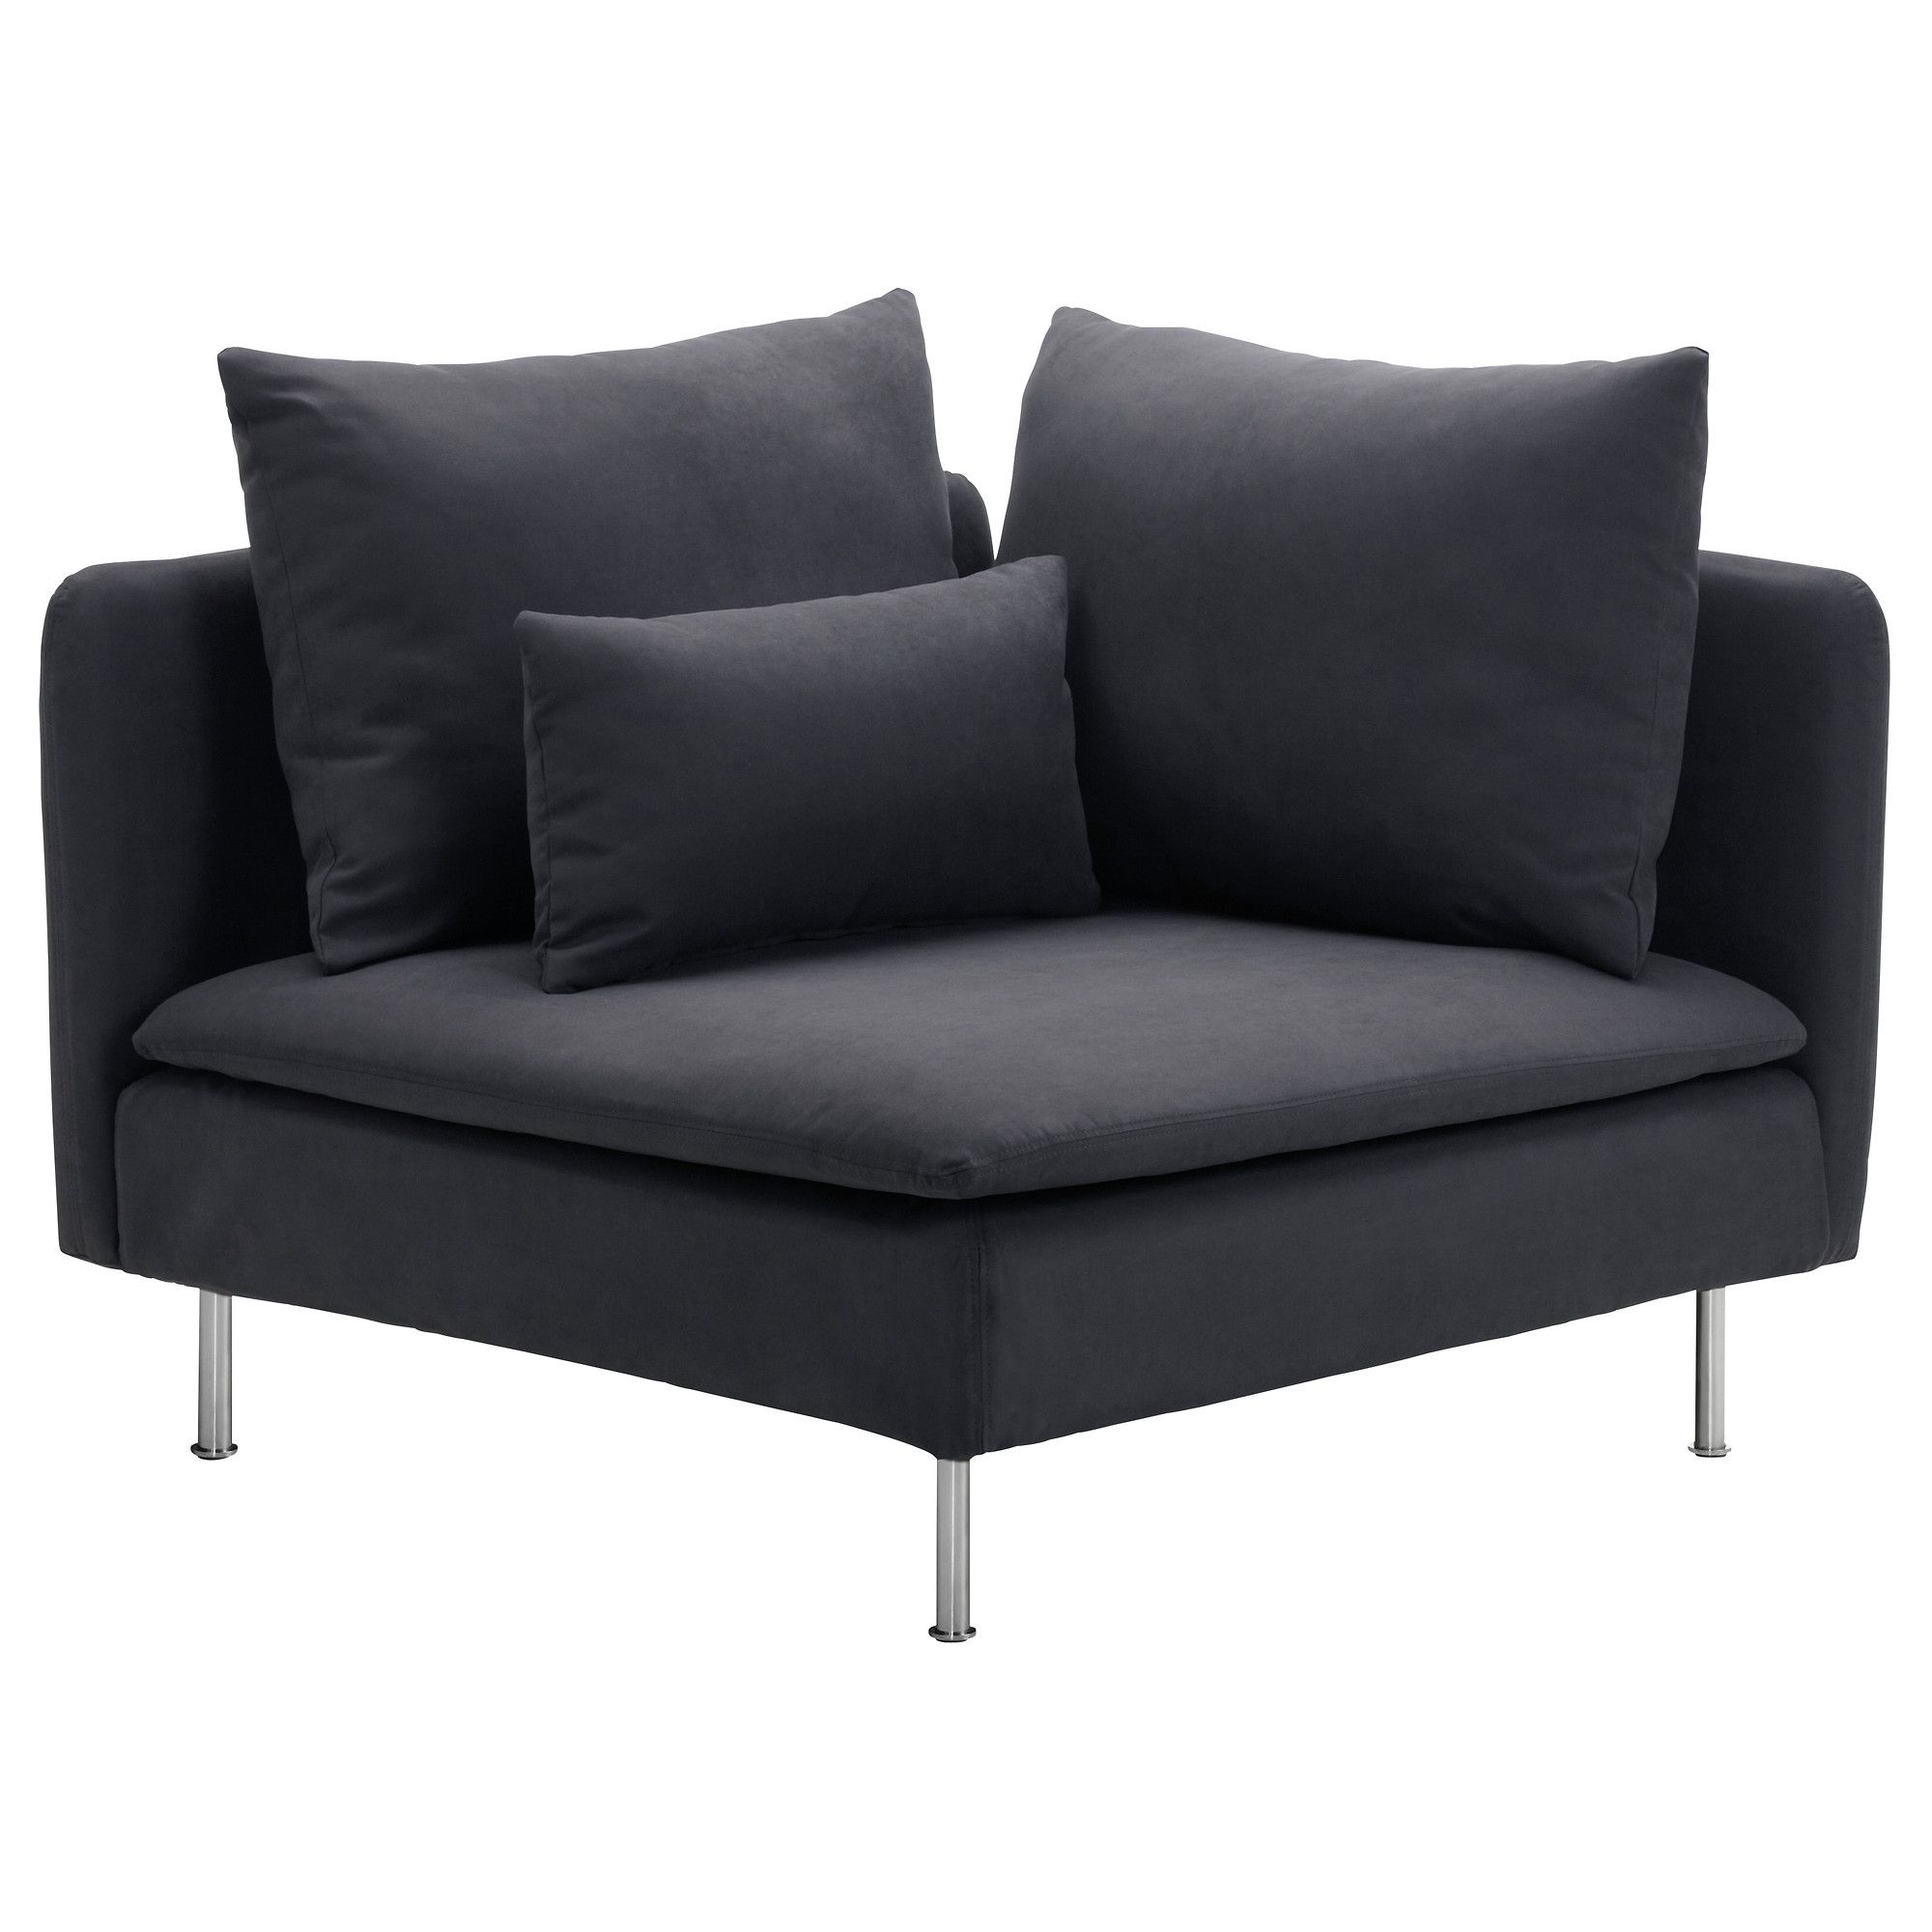 Well Known Single Seat Sofa Chairs With Regard To Intermission: The Super Flexible Soderhamn Corner Sofa (View 4 of 20)